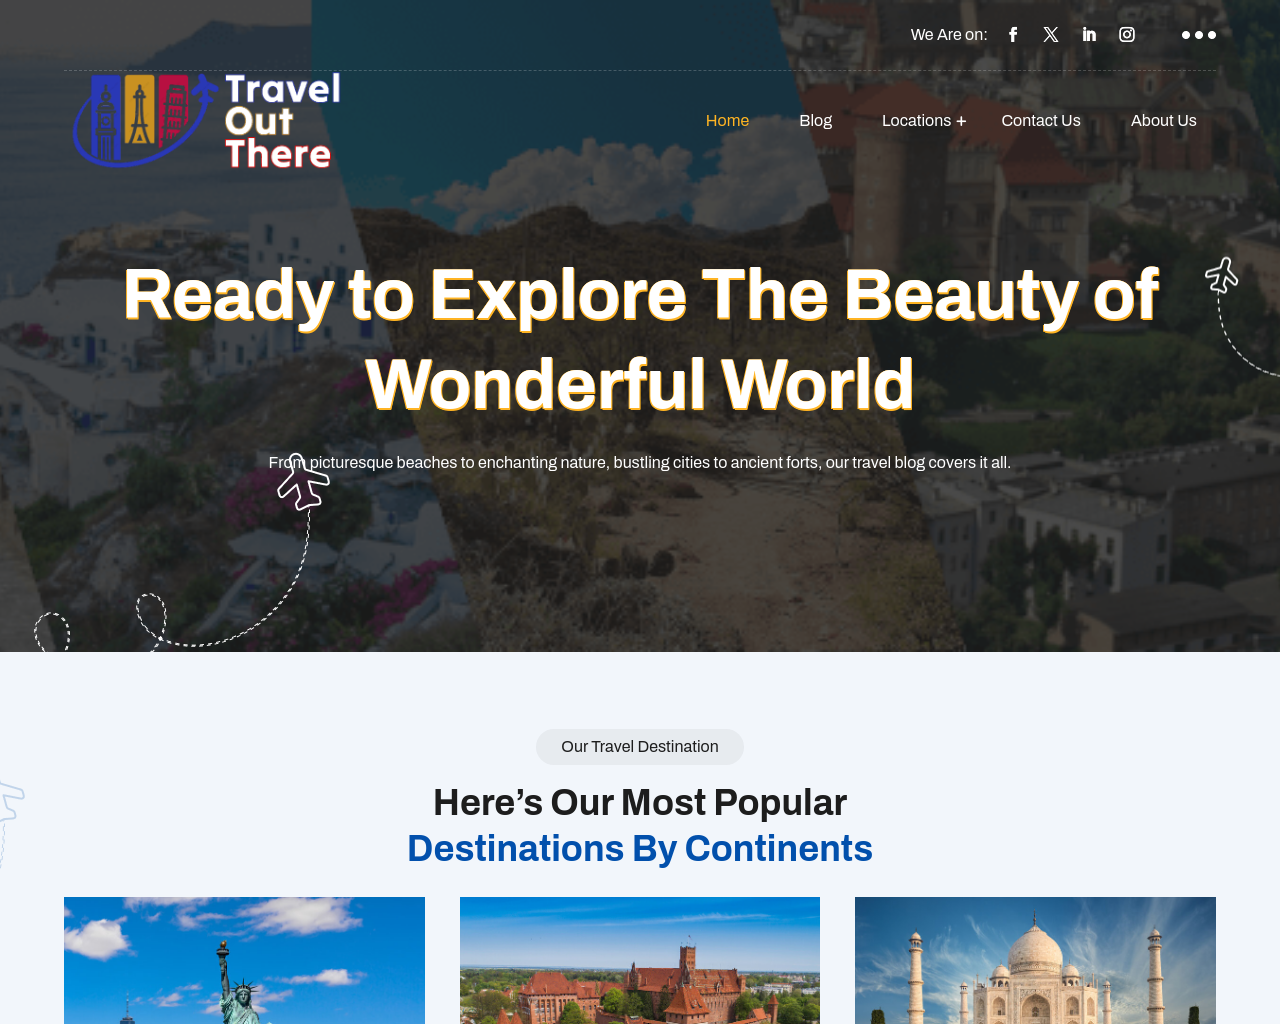 traveloutthere.com